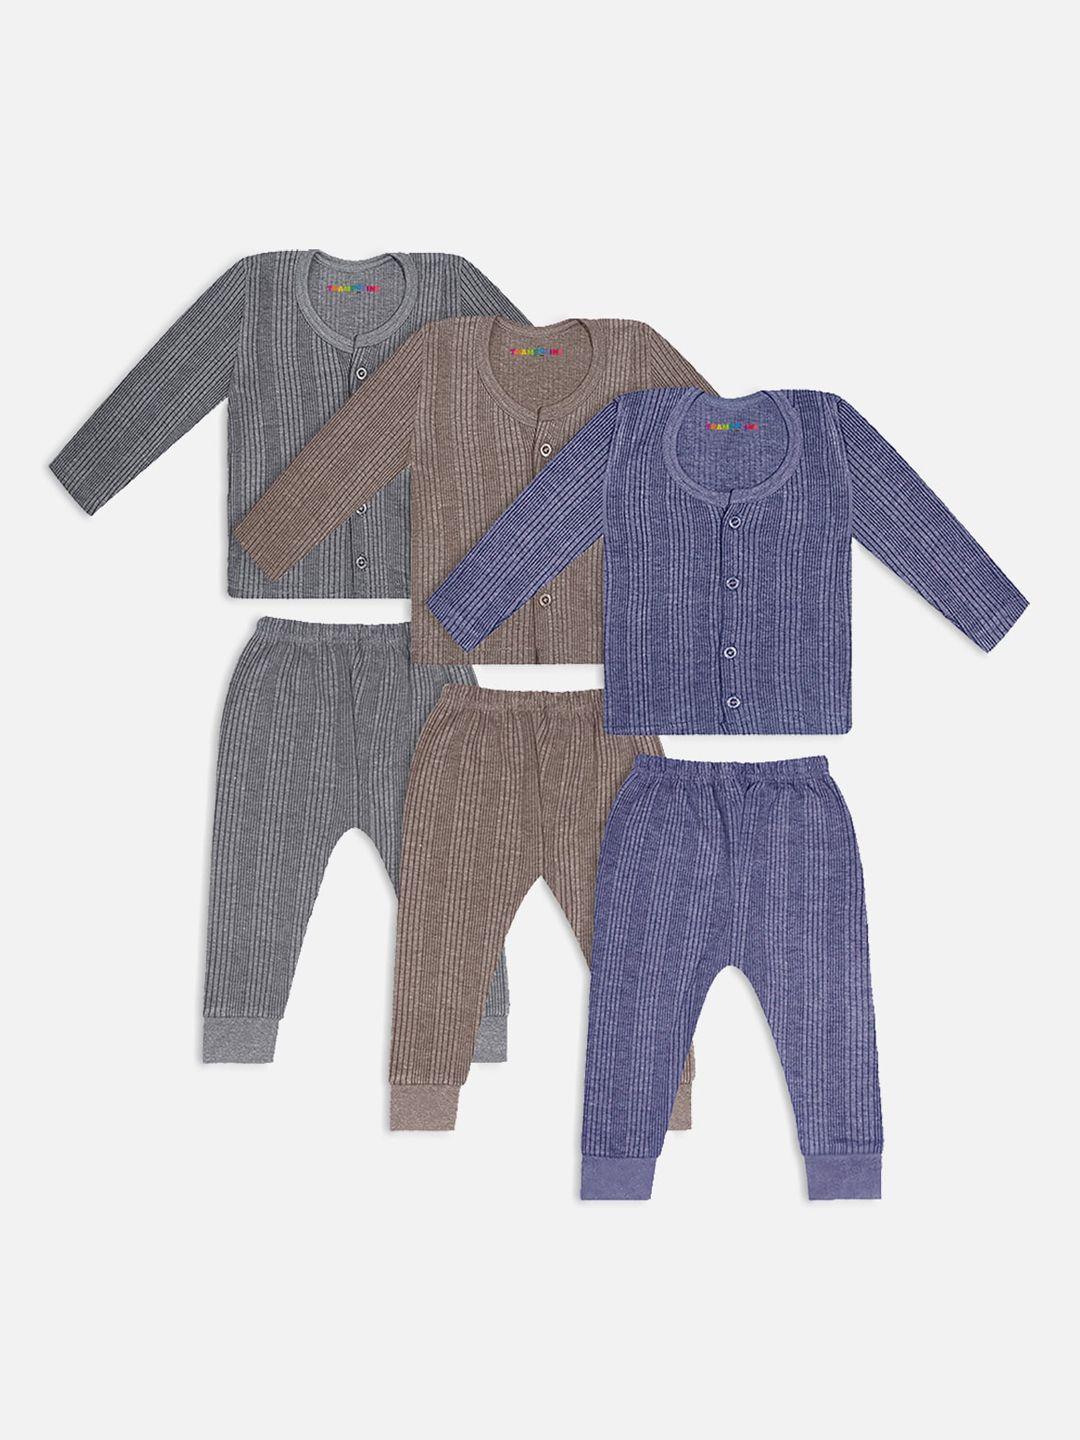 trampoline-infant-kids-pack-of-3-striped-cotton-thermal-set